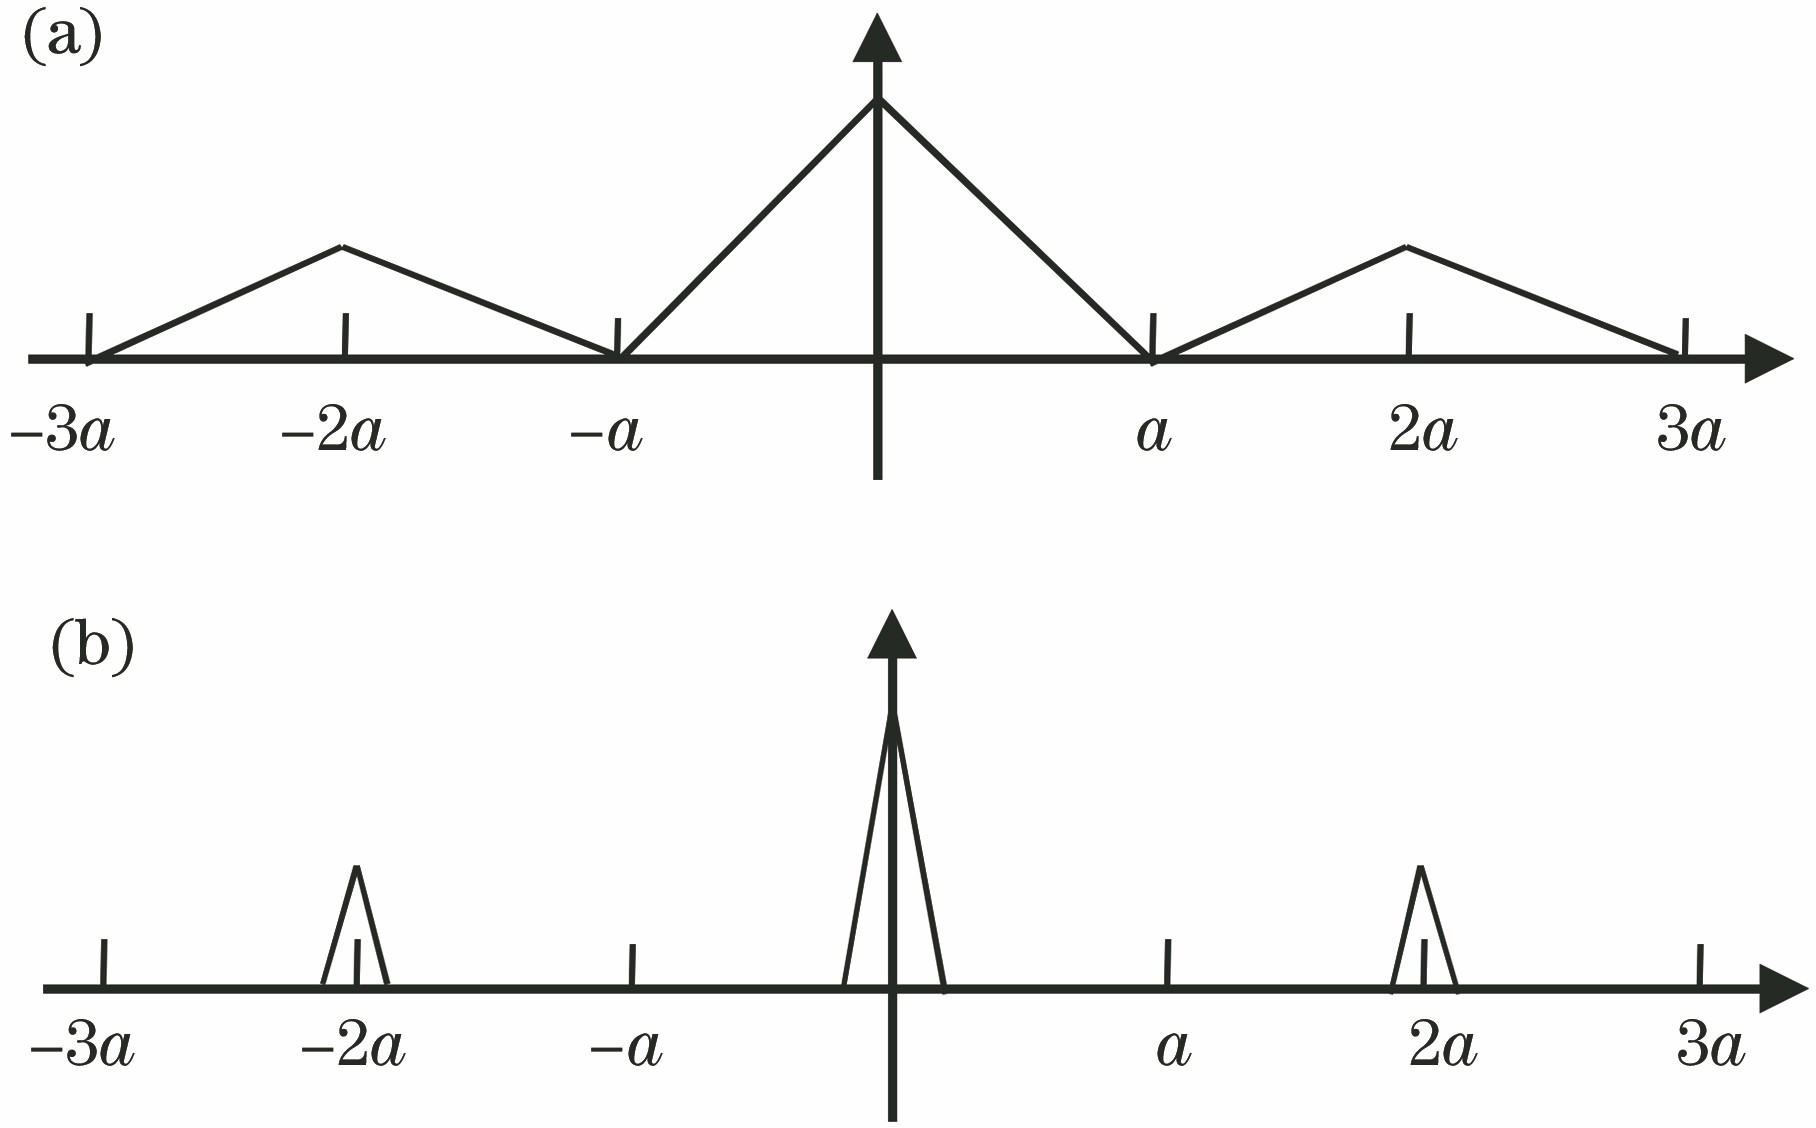 Distribution of the correlation peaksof different JTC methods. (a) Conventional JTC; (b) BJTC